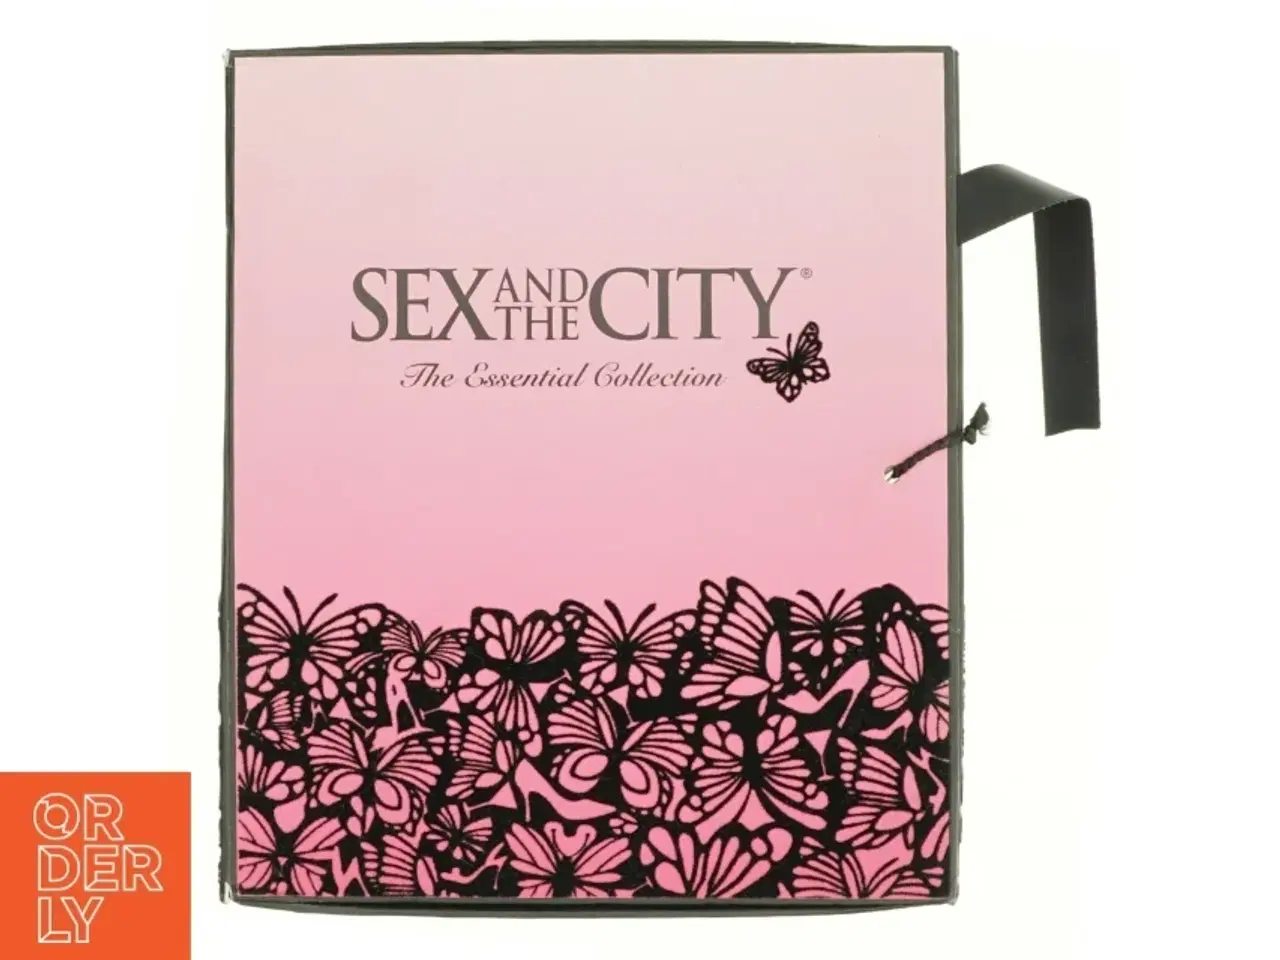 Billede 1 - Sex and the city, the essential collection